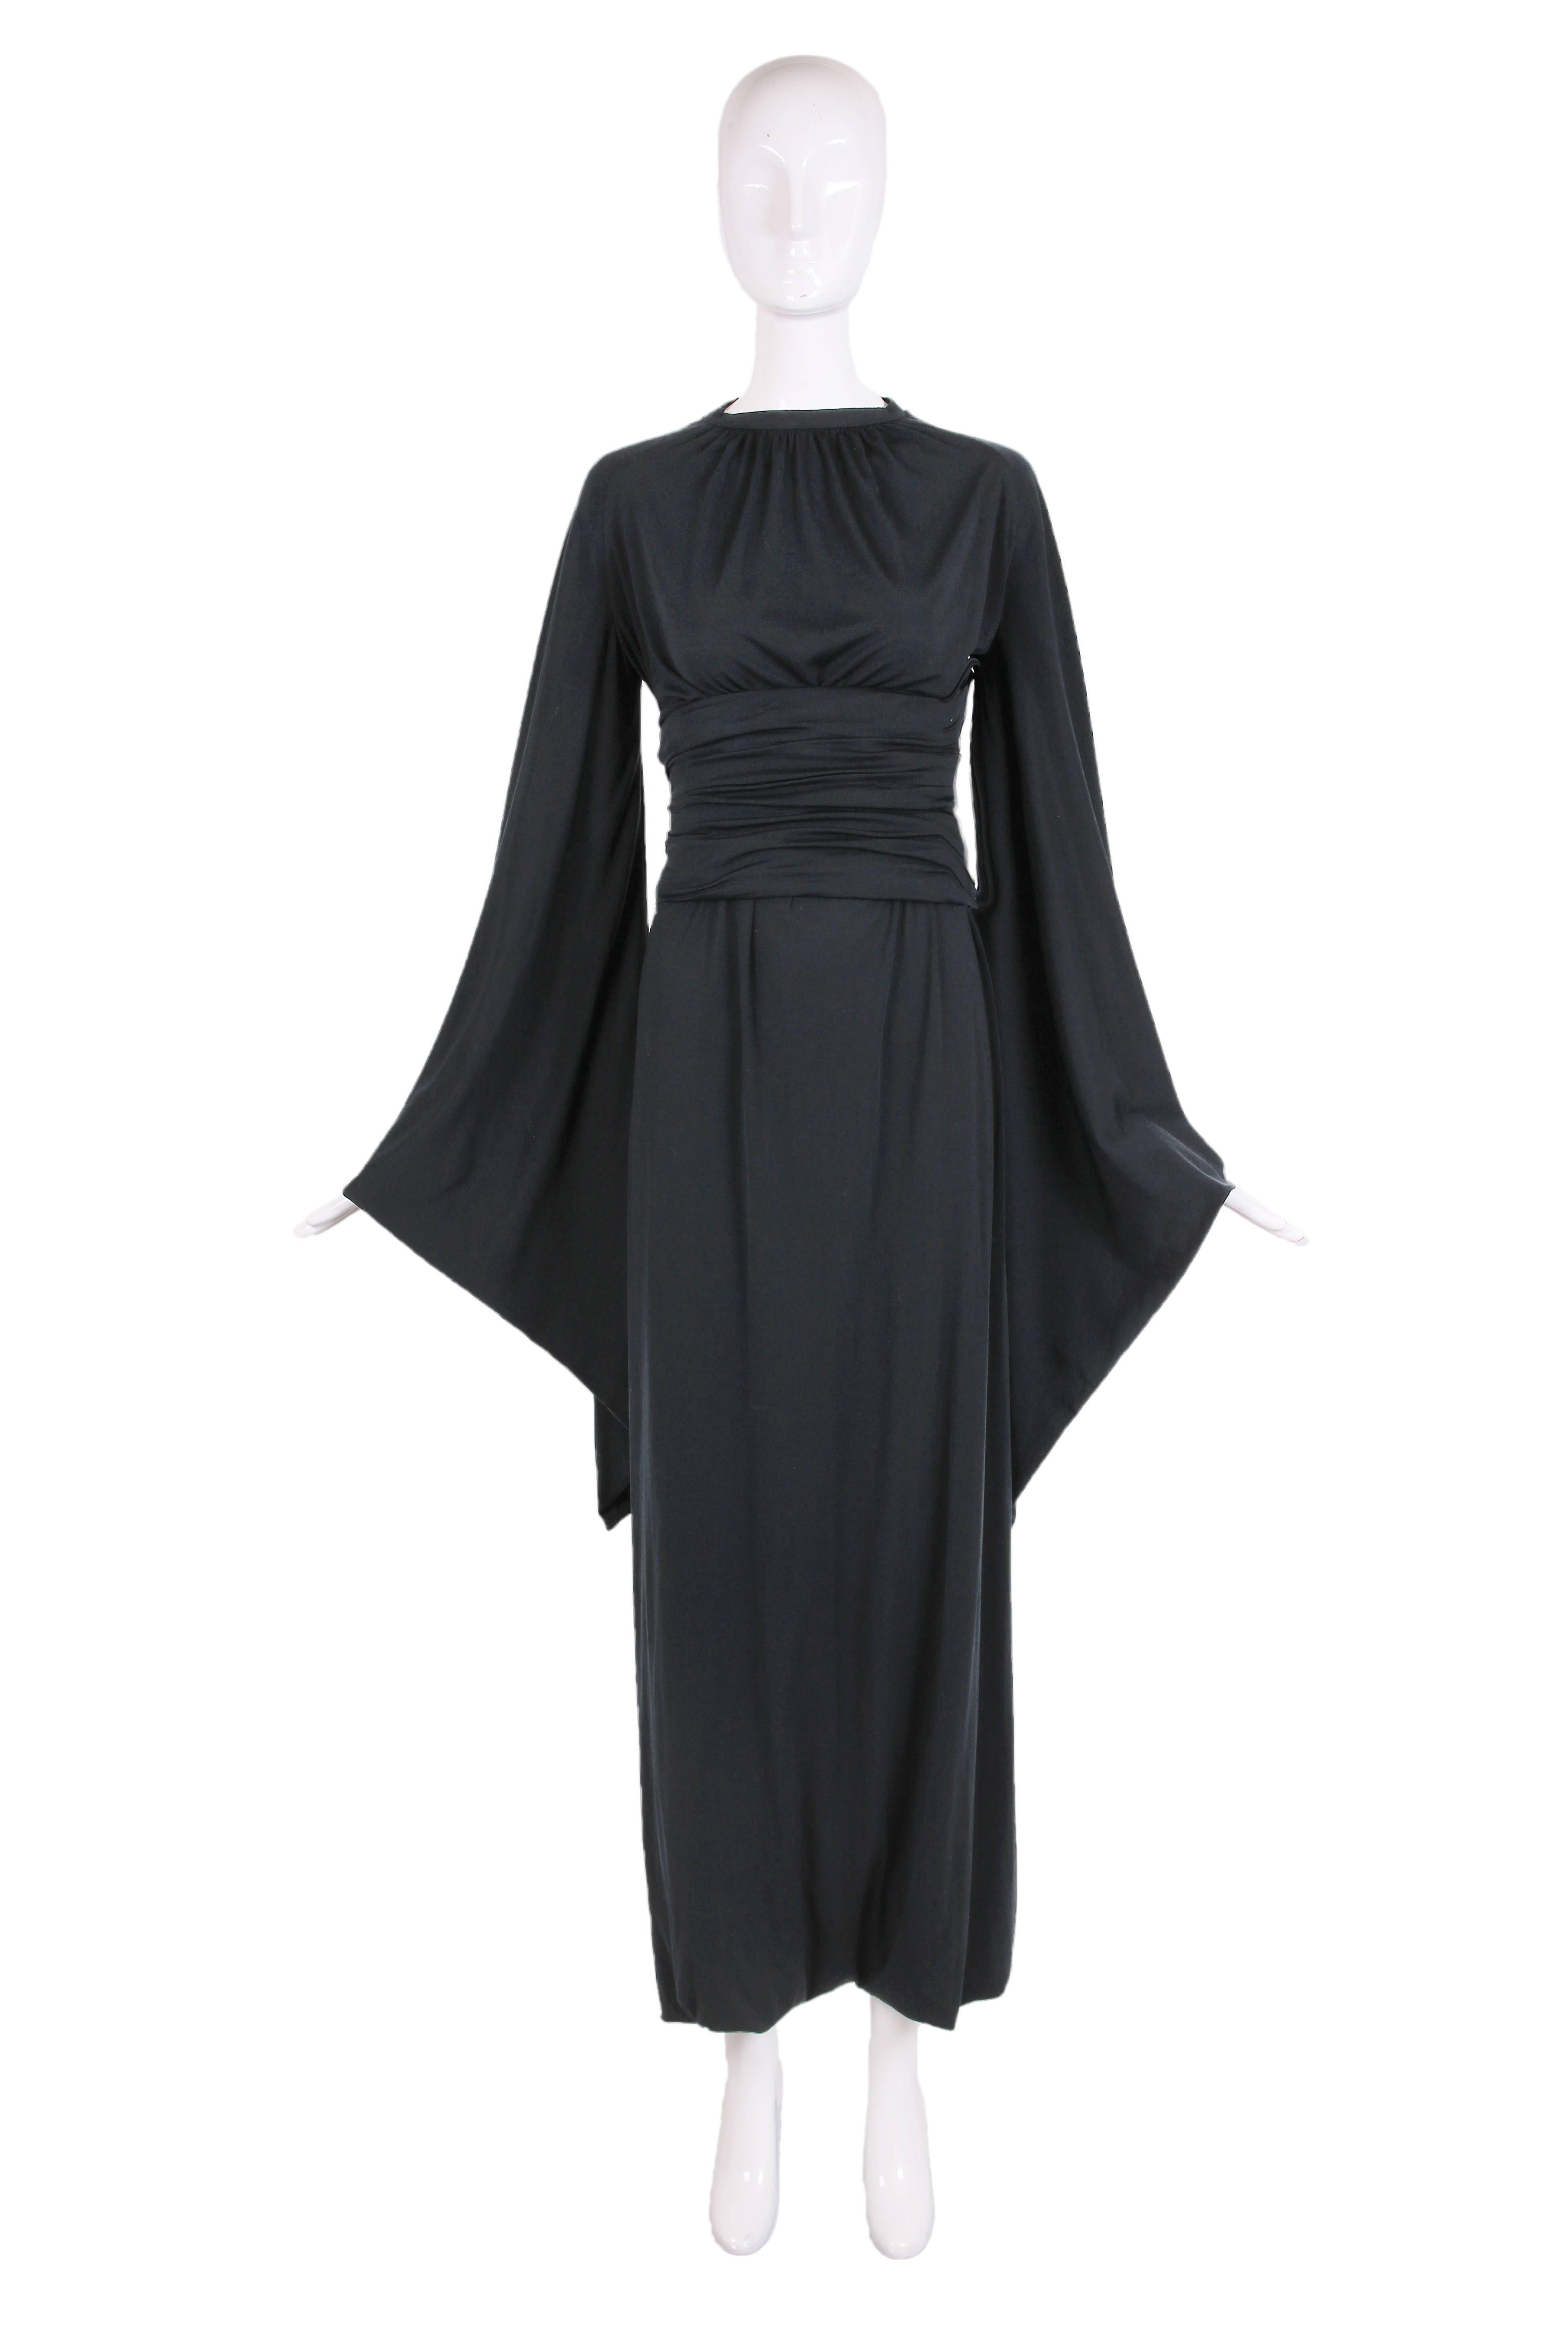 Ca.1977 Pierre Cardin black jersey harem dress with pagoda sleeves and attached belt. The dress is actually sewn closed at the hem with two openings for either leg. In excellent condition with some very tiny abrasions to the jersey fabric scattered